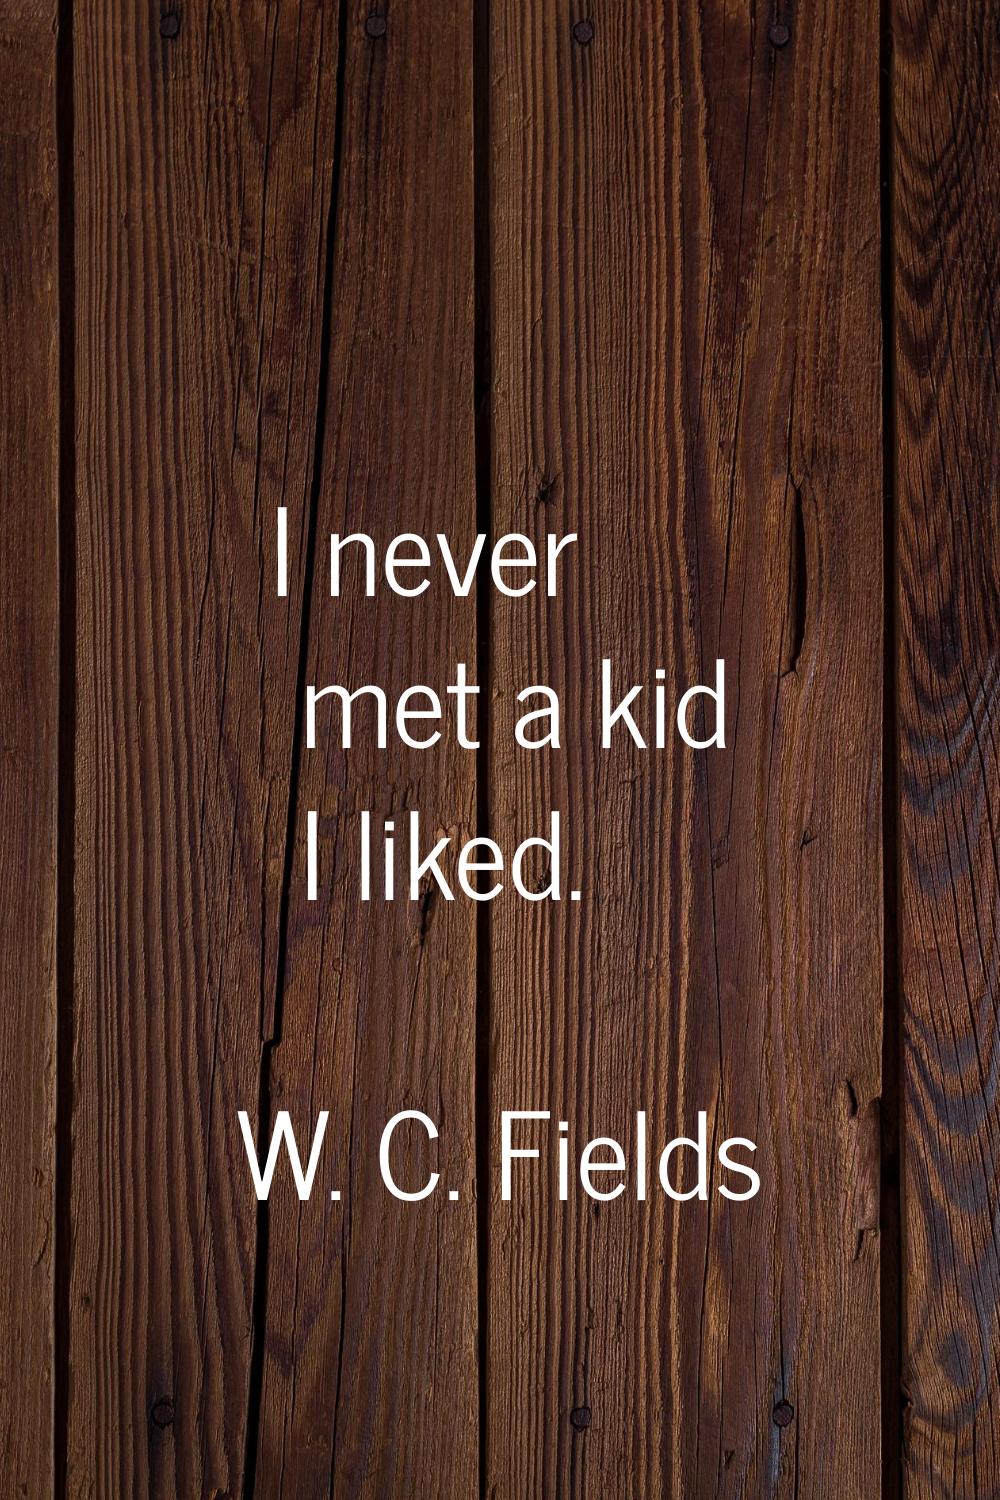 I never met a kid I liked.